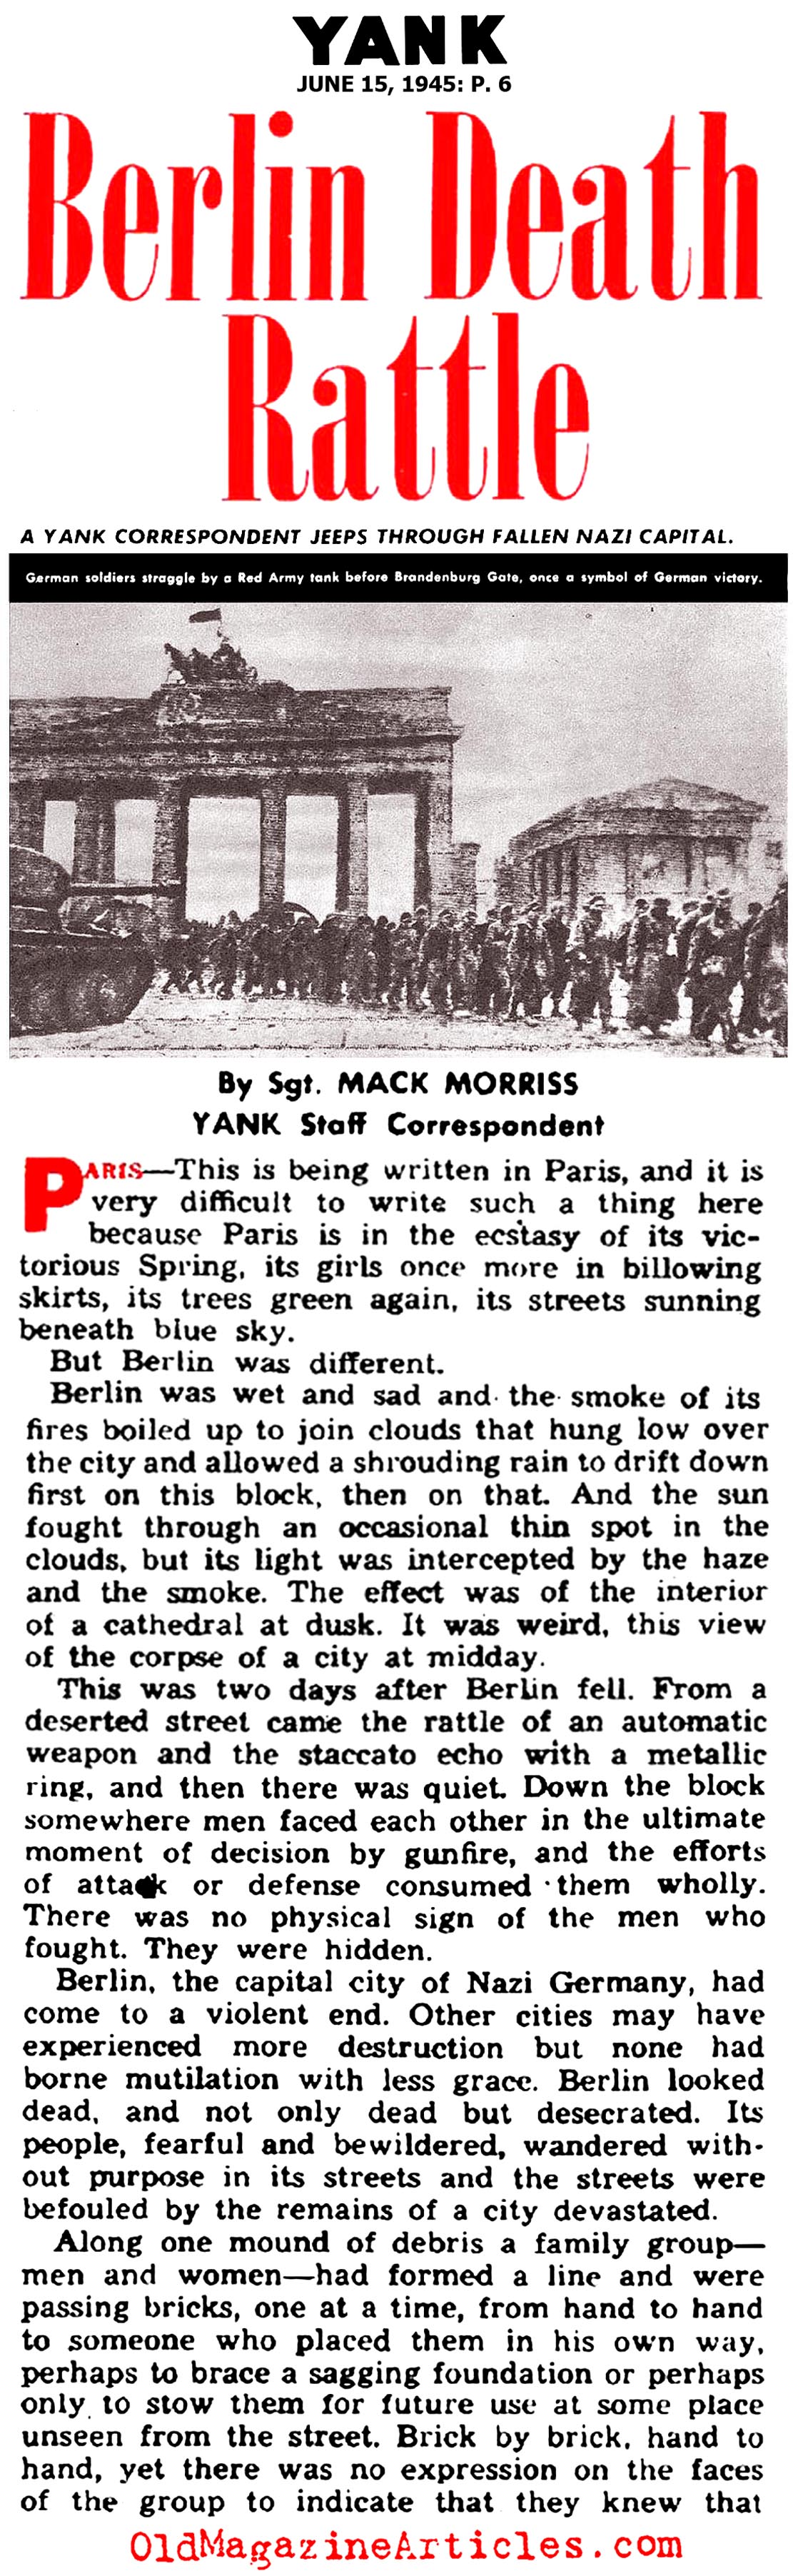 The End of the War in Berlin (Yank Magazine, 1945)